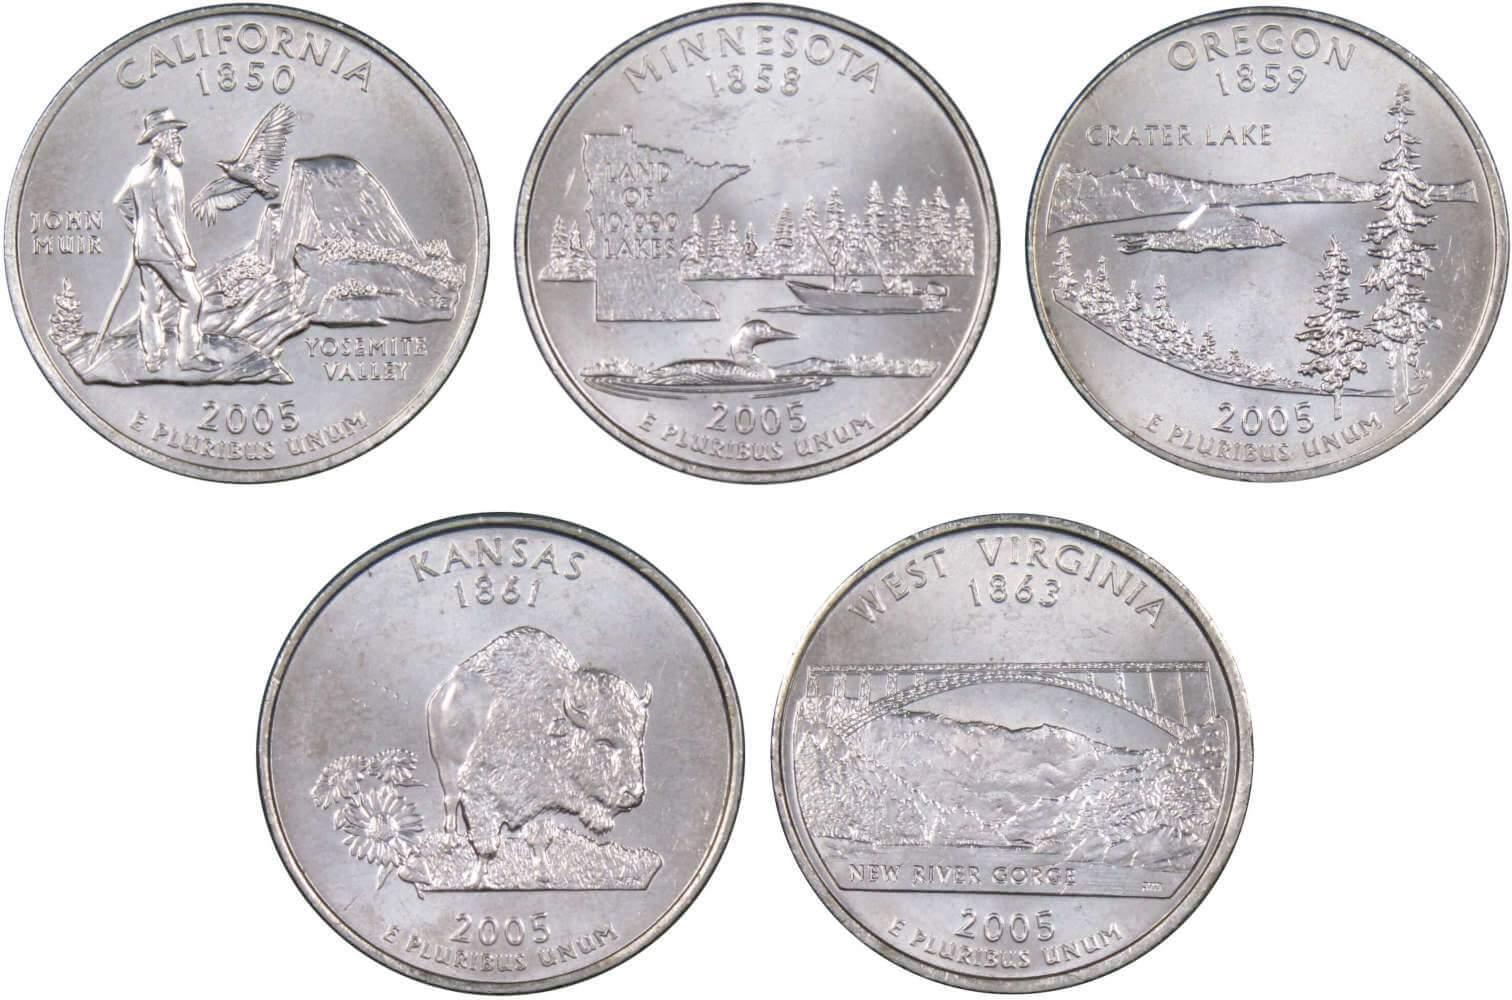 2005 P State Quarter 5 Coin Set BU Uncirculated Mint State 25c Collectible